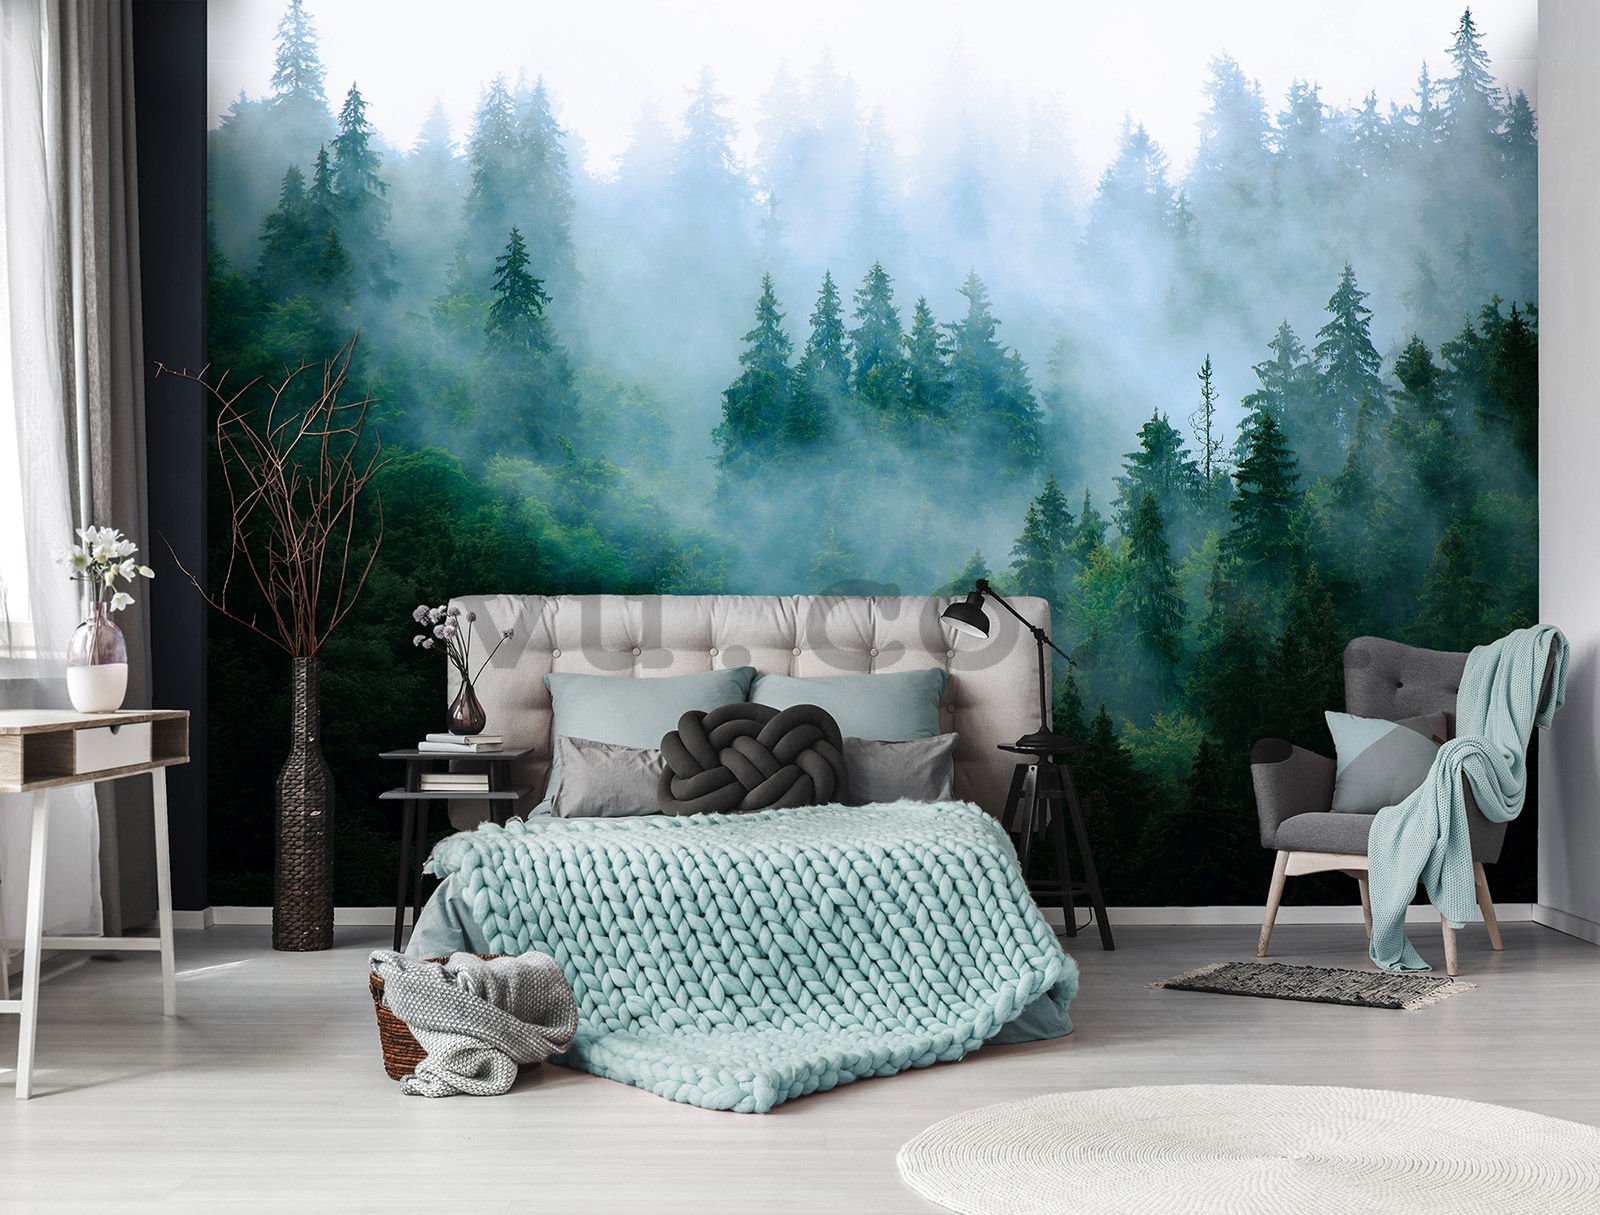 Wall mural vlies: Fog over the forest (3) - 254x184 cm